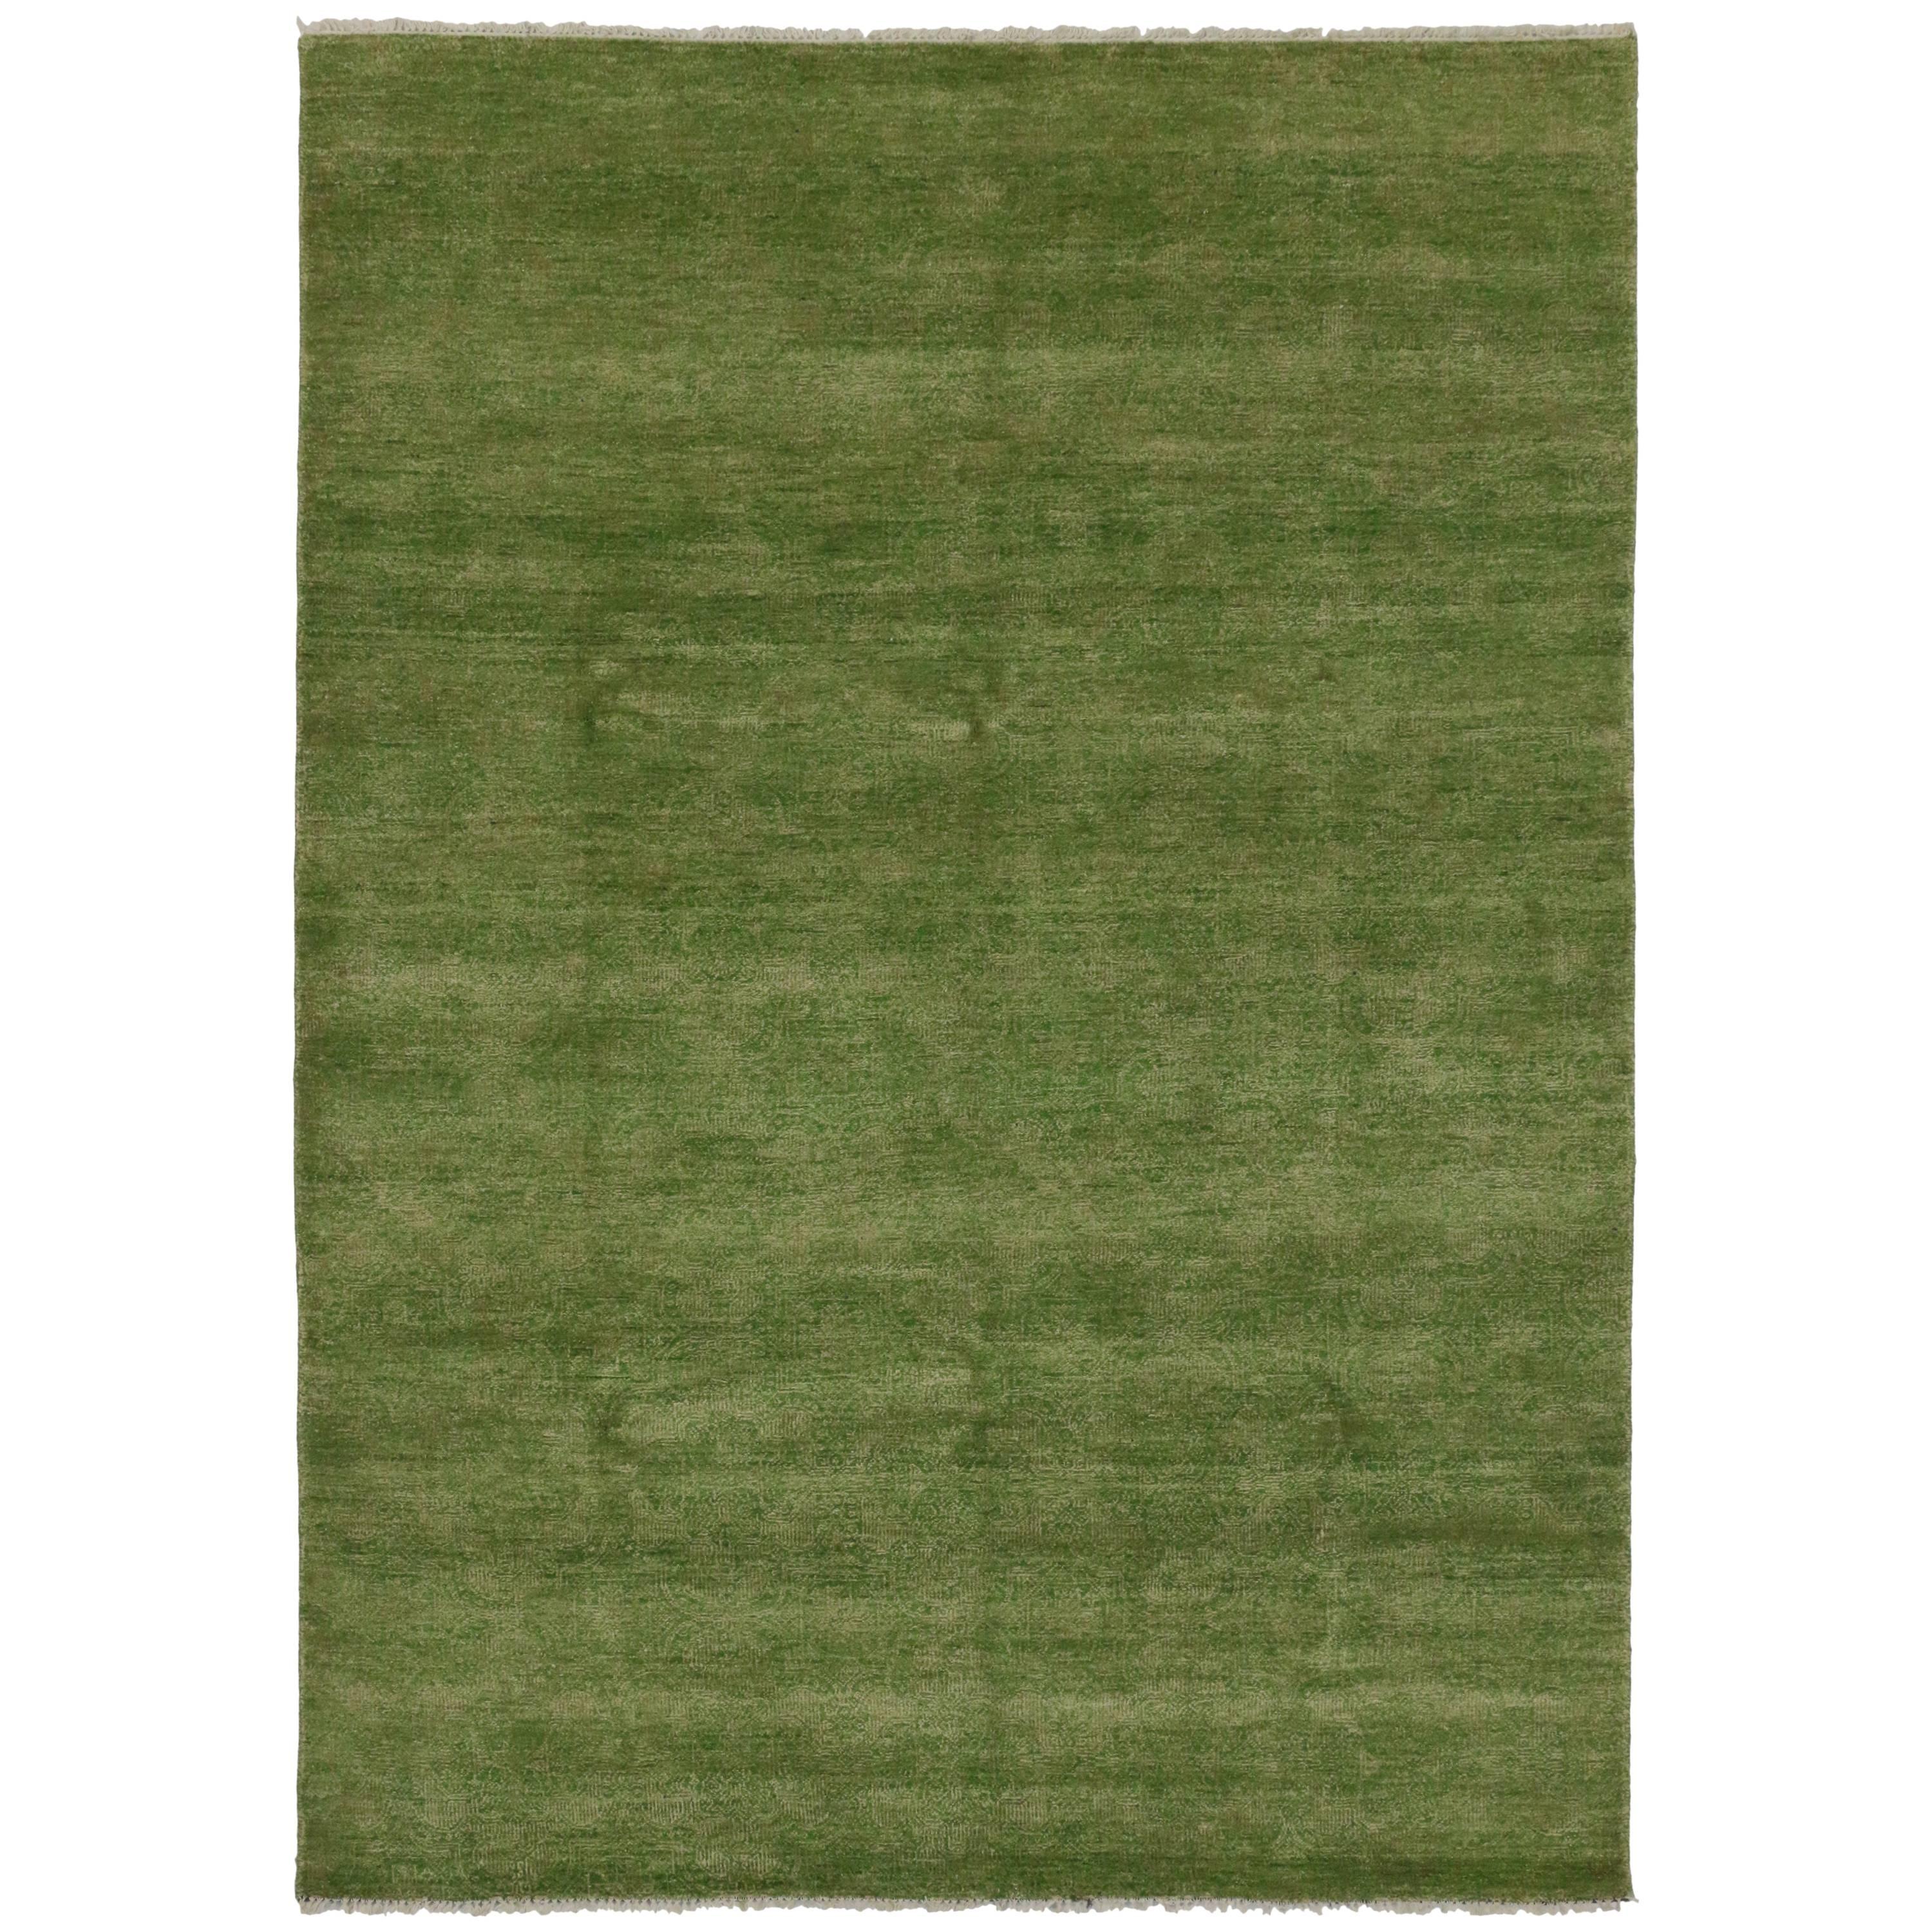 New Transitional Green Area Rug with Modern Style